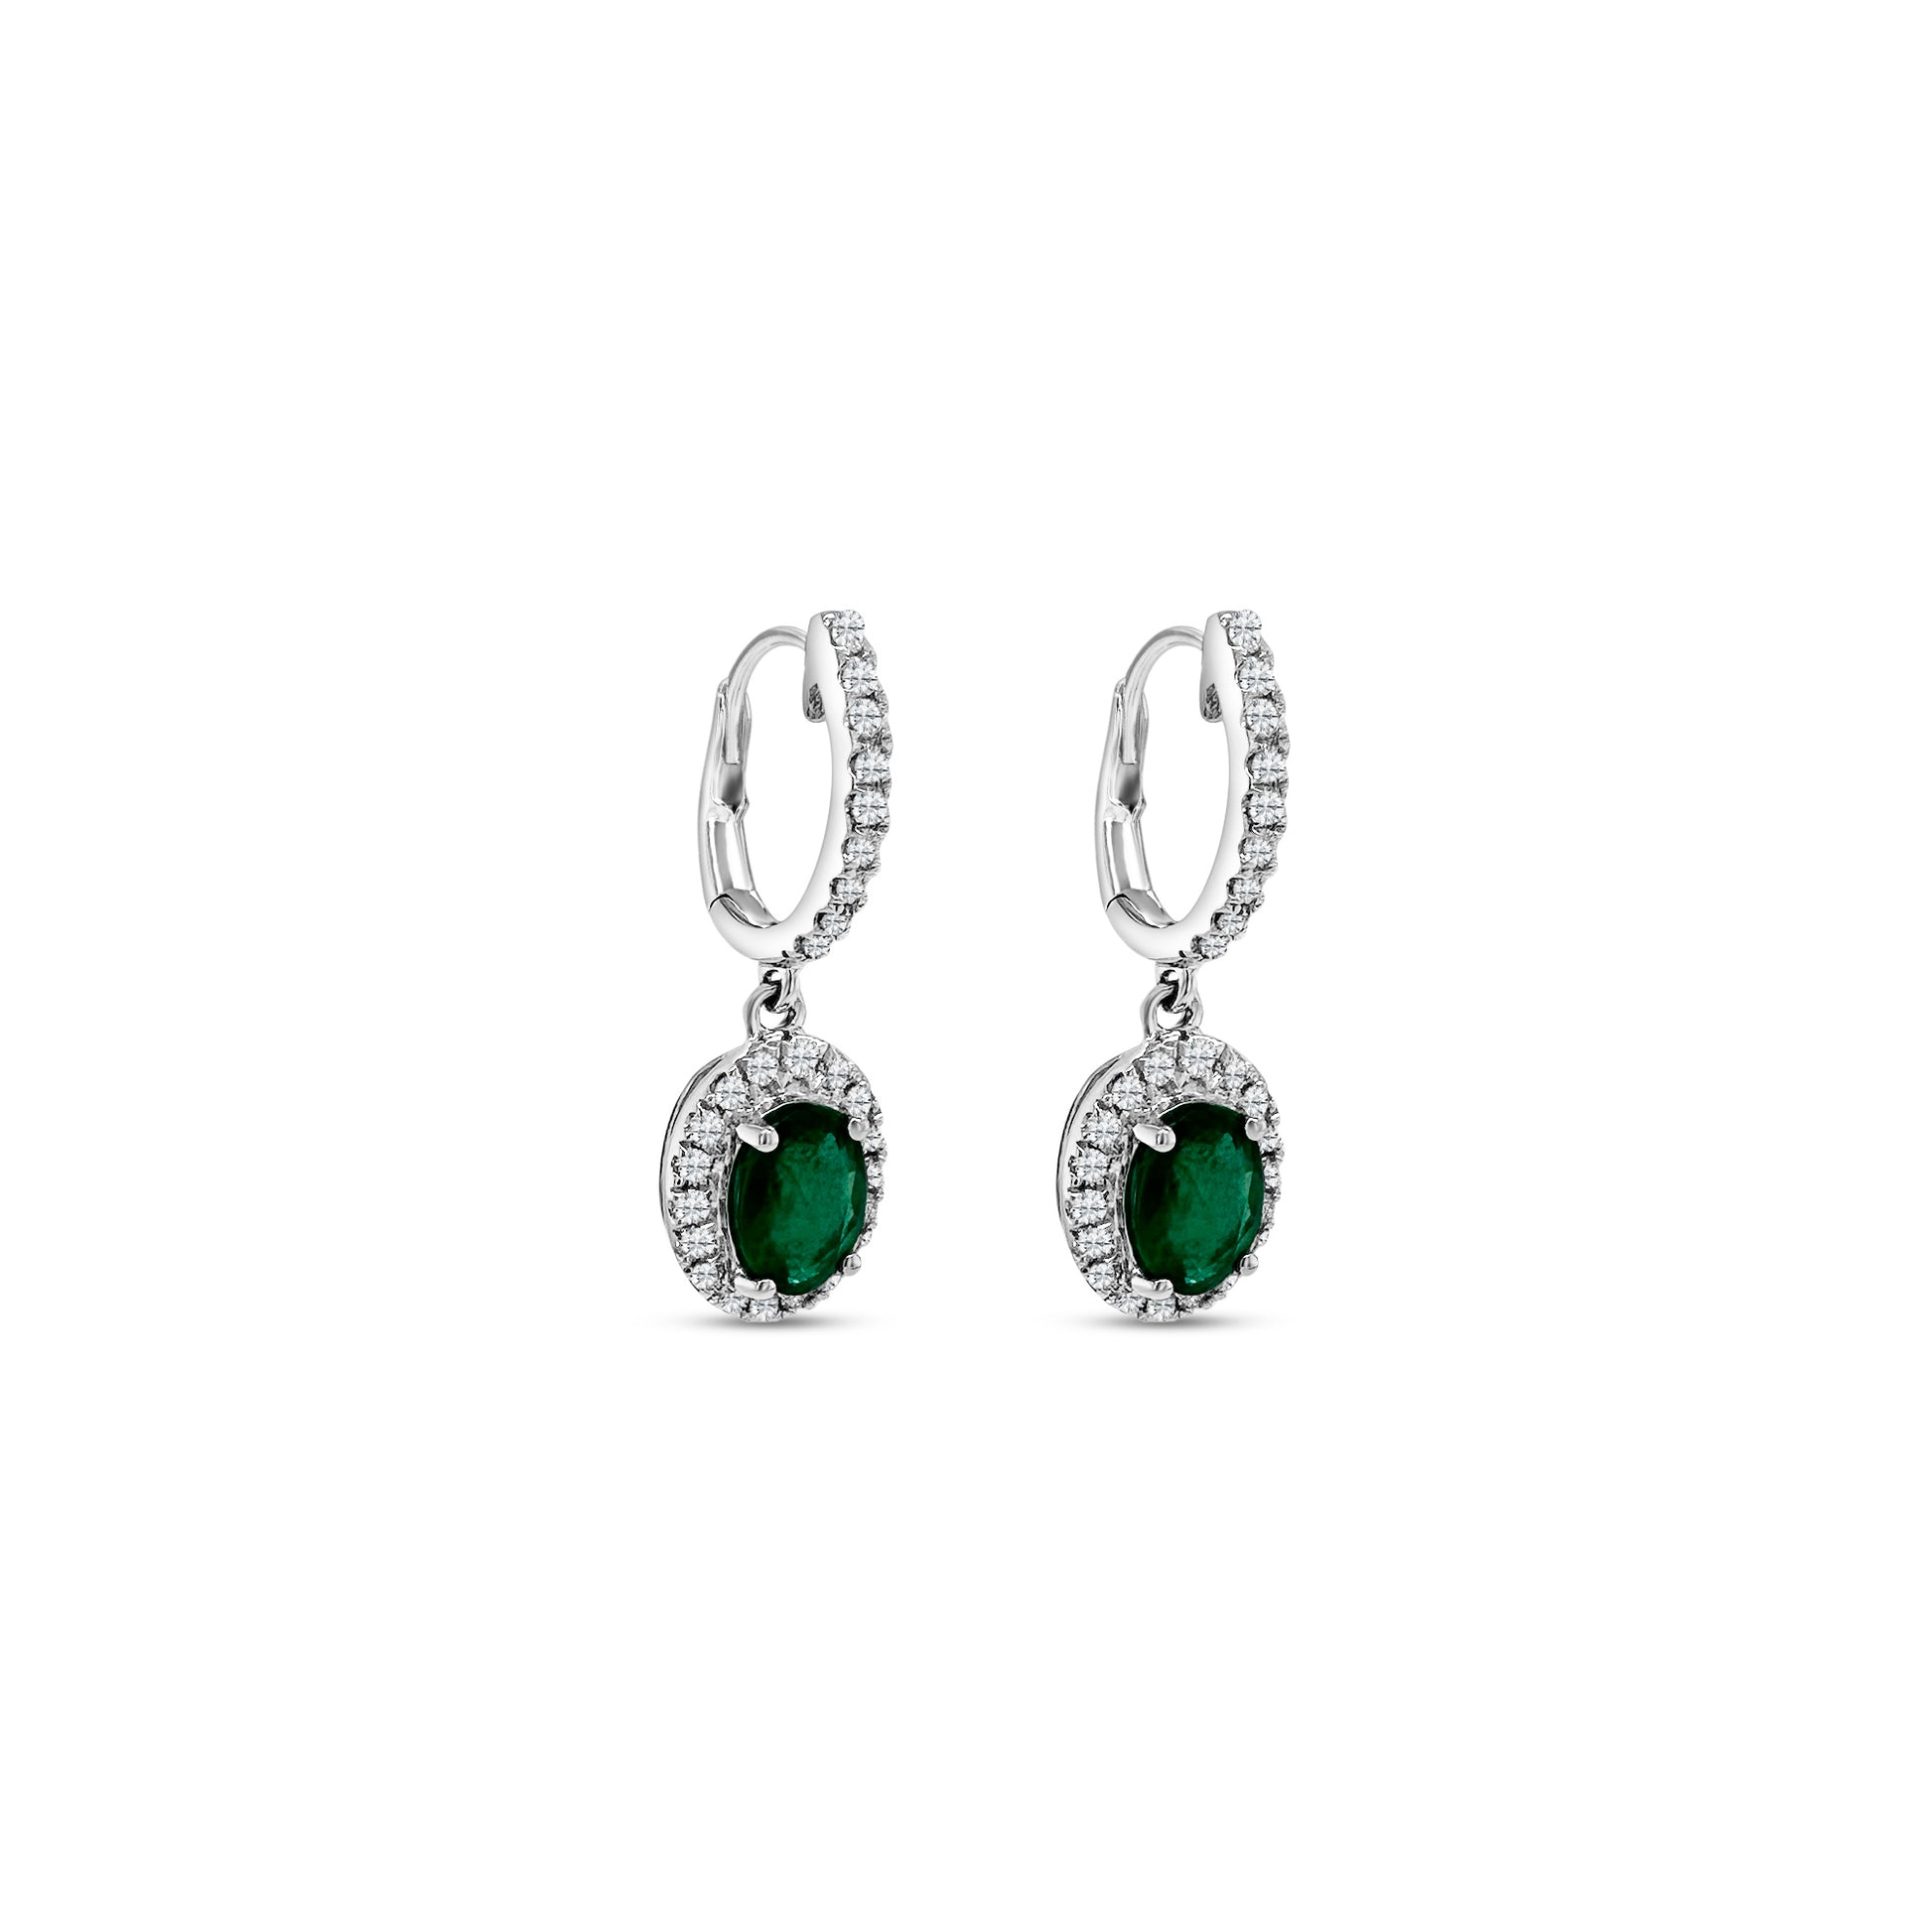  Oval emerald and diamond drop earrings, elegant jewelry pieces, luxurious gemstone accessories, exquisite emerald and diamond combination, sophisticated design, glamorous statement earrings, sparkling emerald and diamond accents, stunning drop style, fine craftsmanship, radiant gemstone earrings.